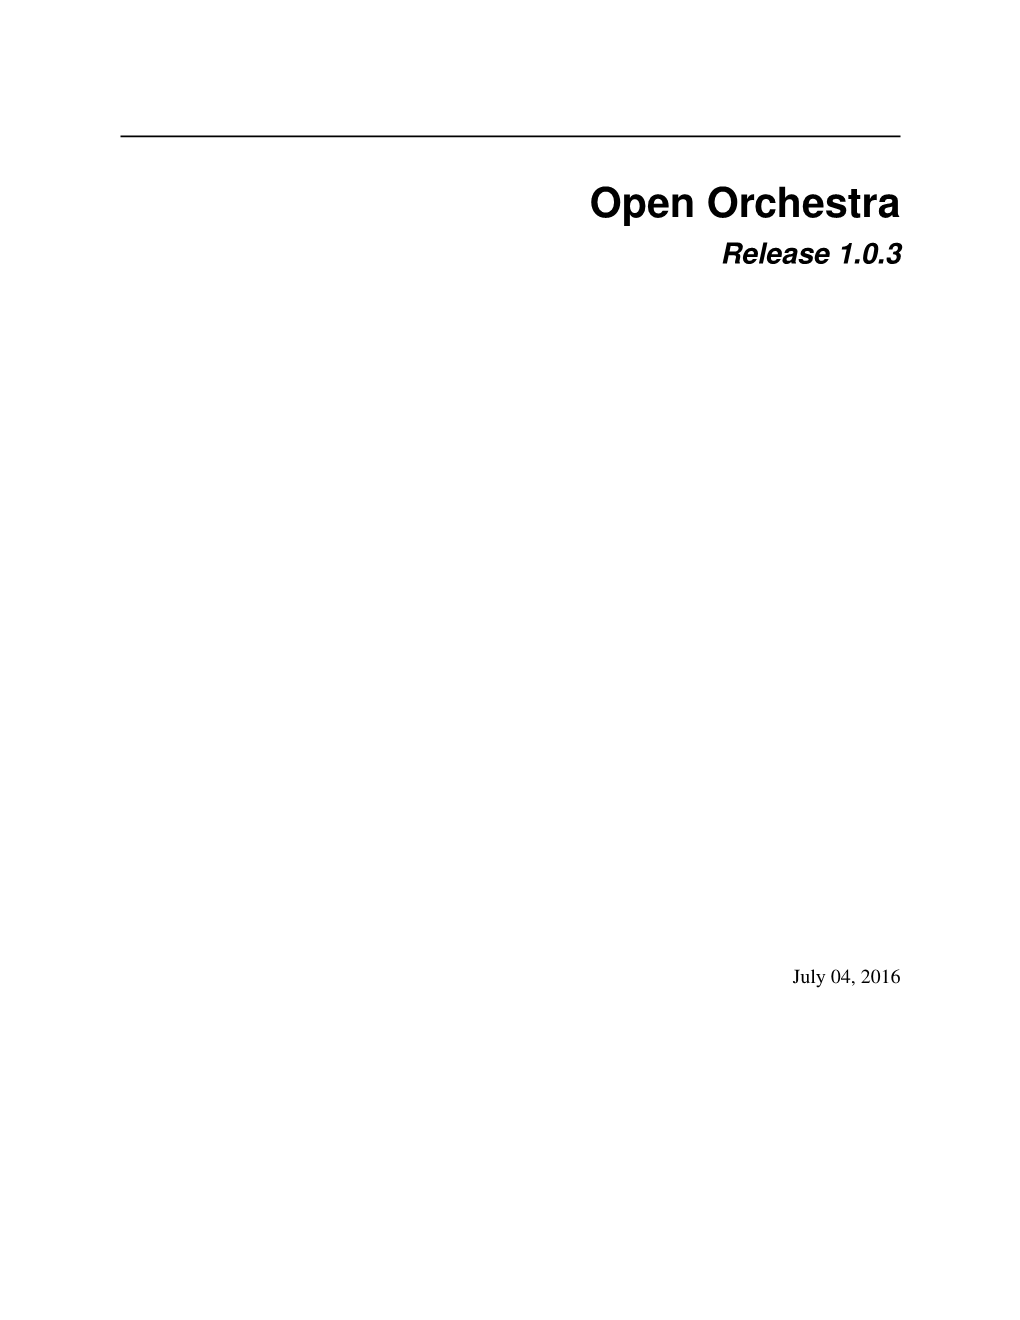 Open Orchestra Release 1.0.3